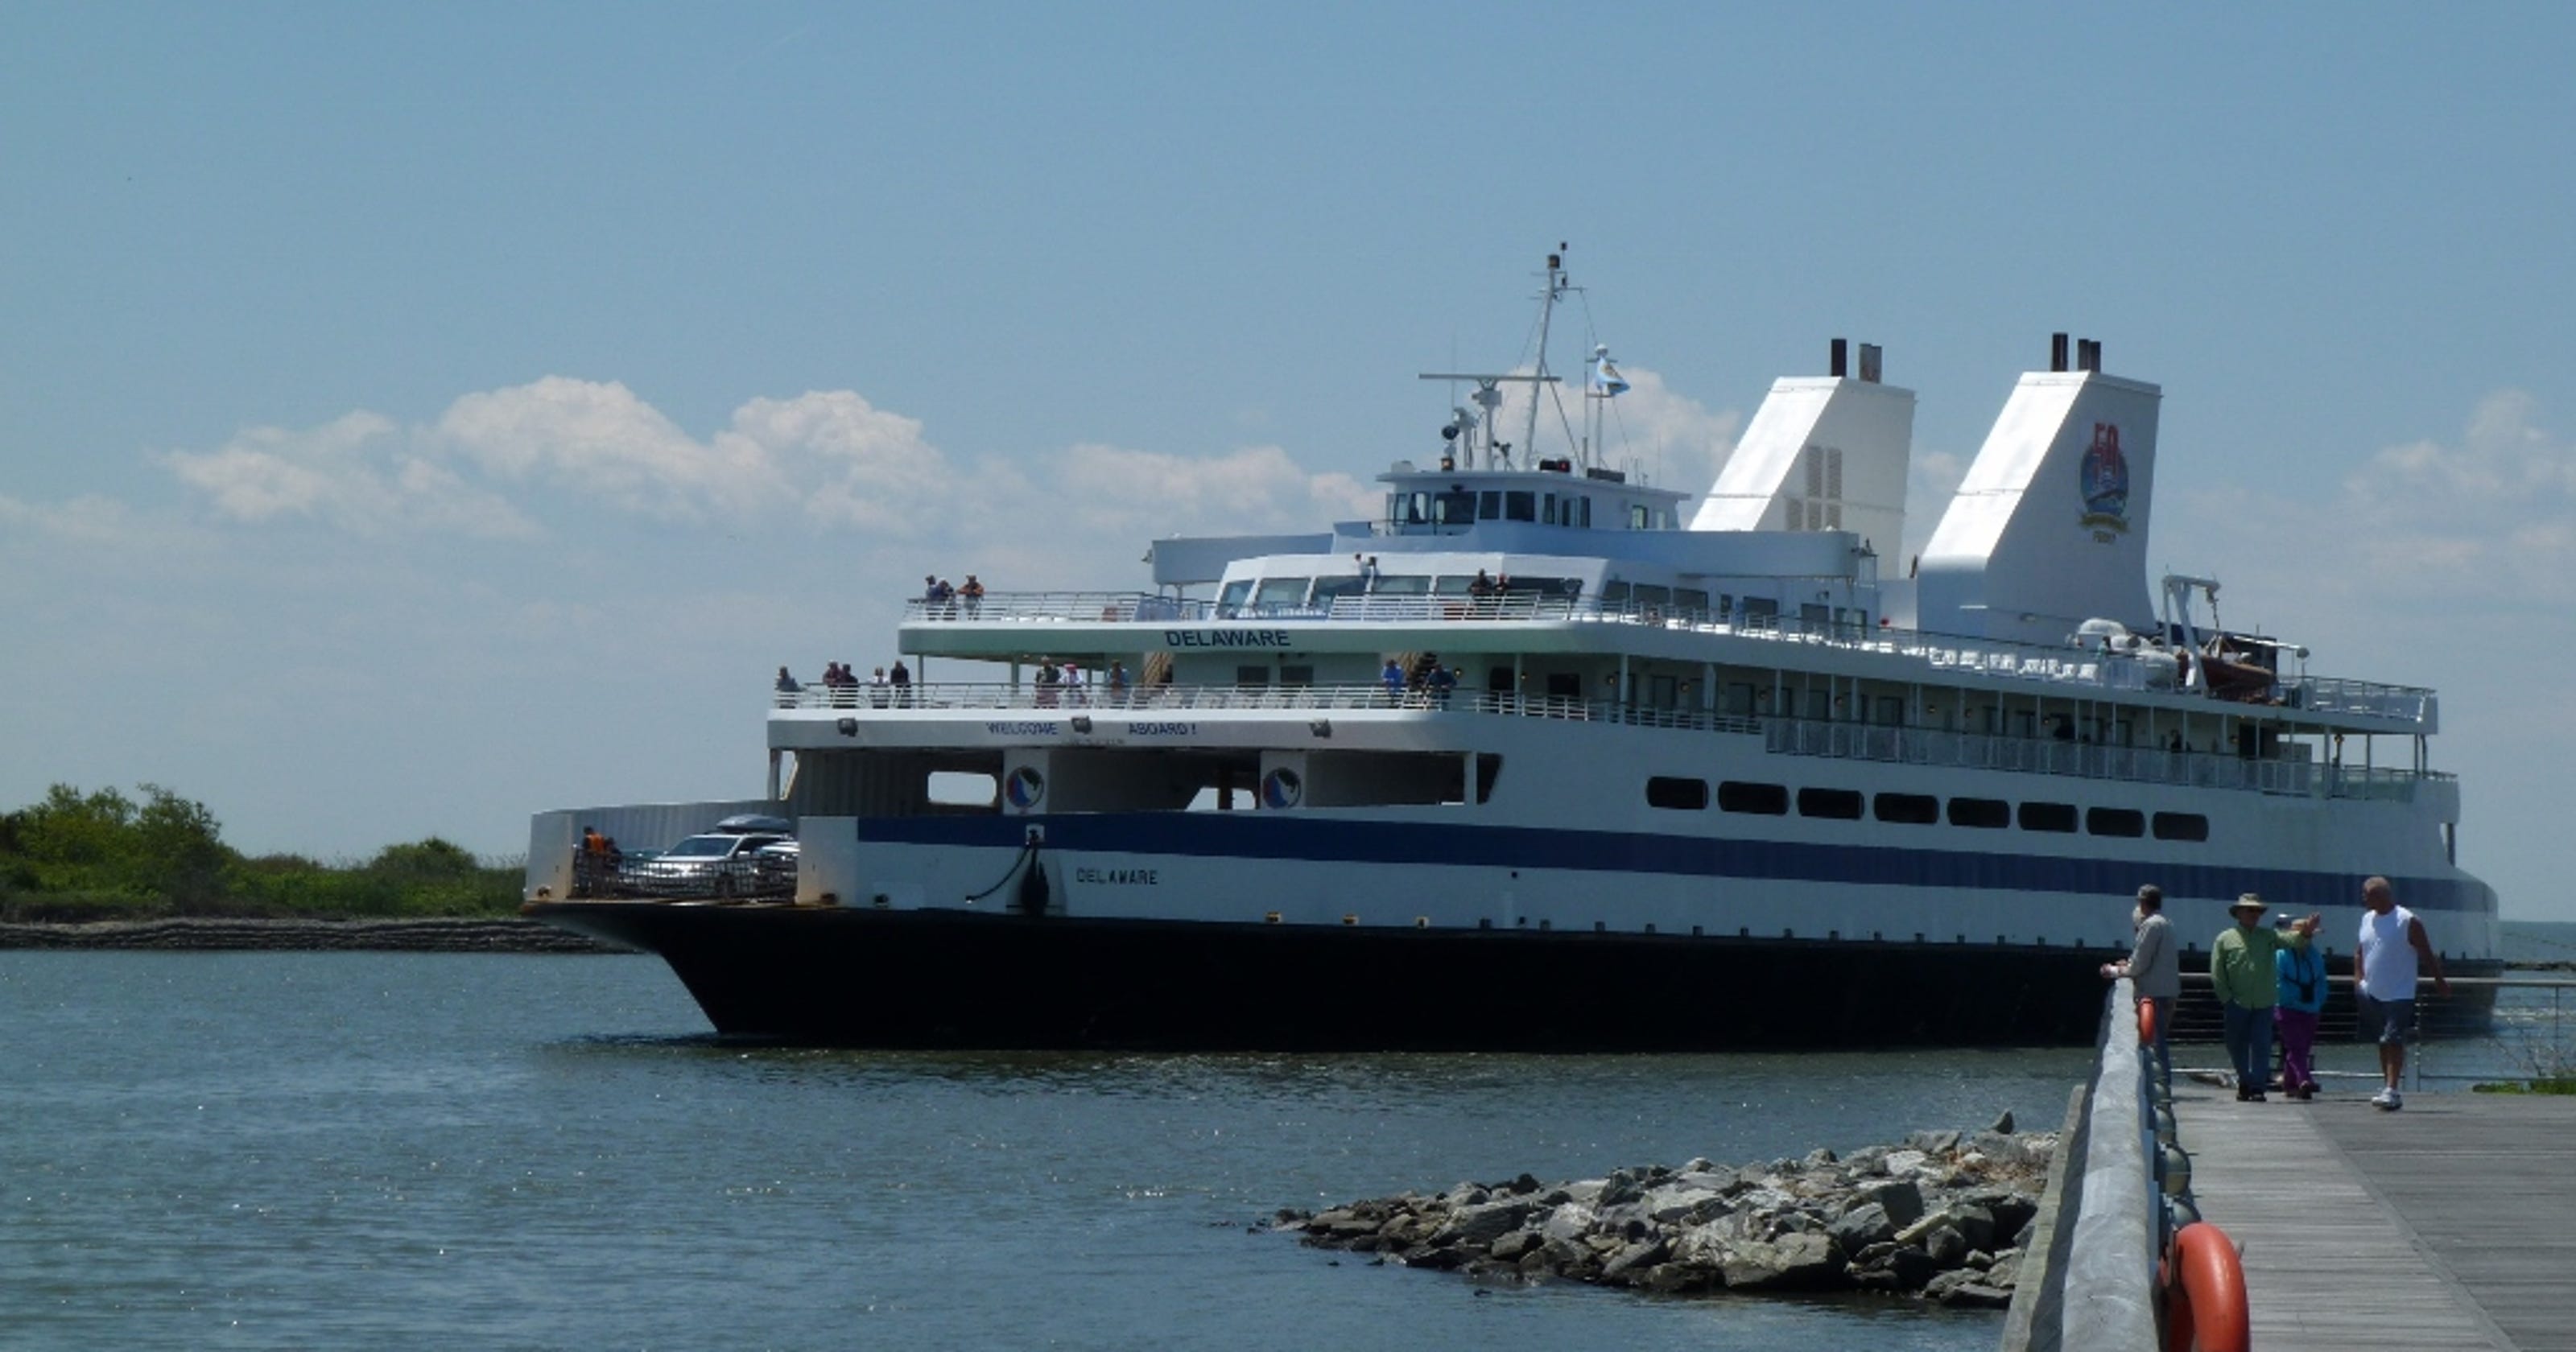 Cape MayLewes Ferry sets anniversary rates